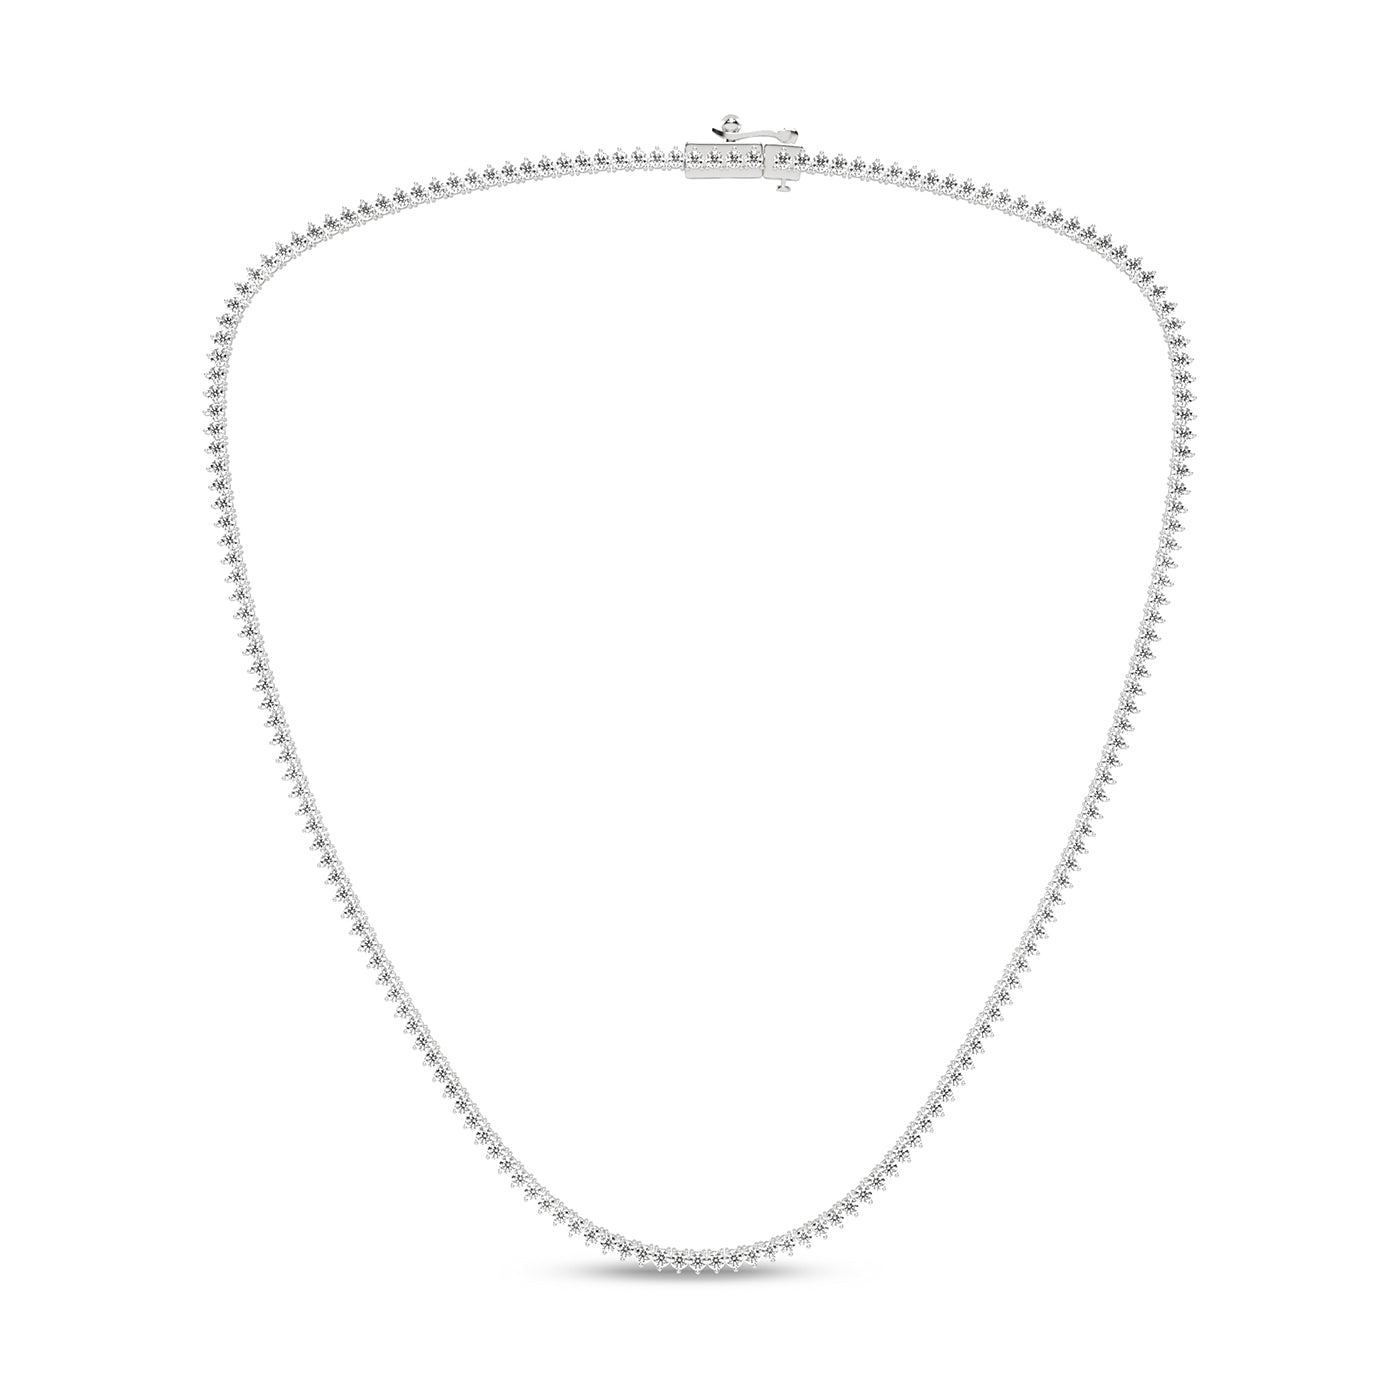 Graduated Atmos Tennis Necklace_Product Angle_6 Ct. - 1